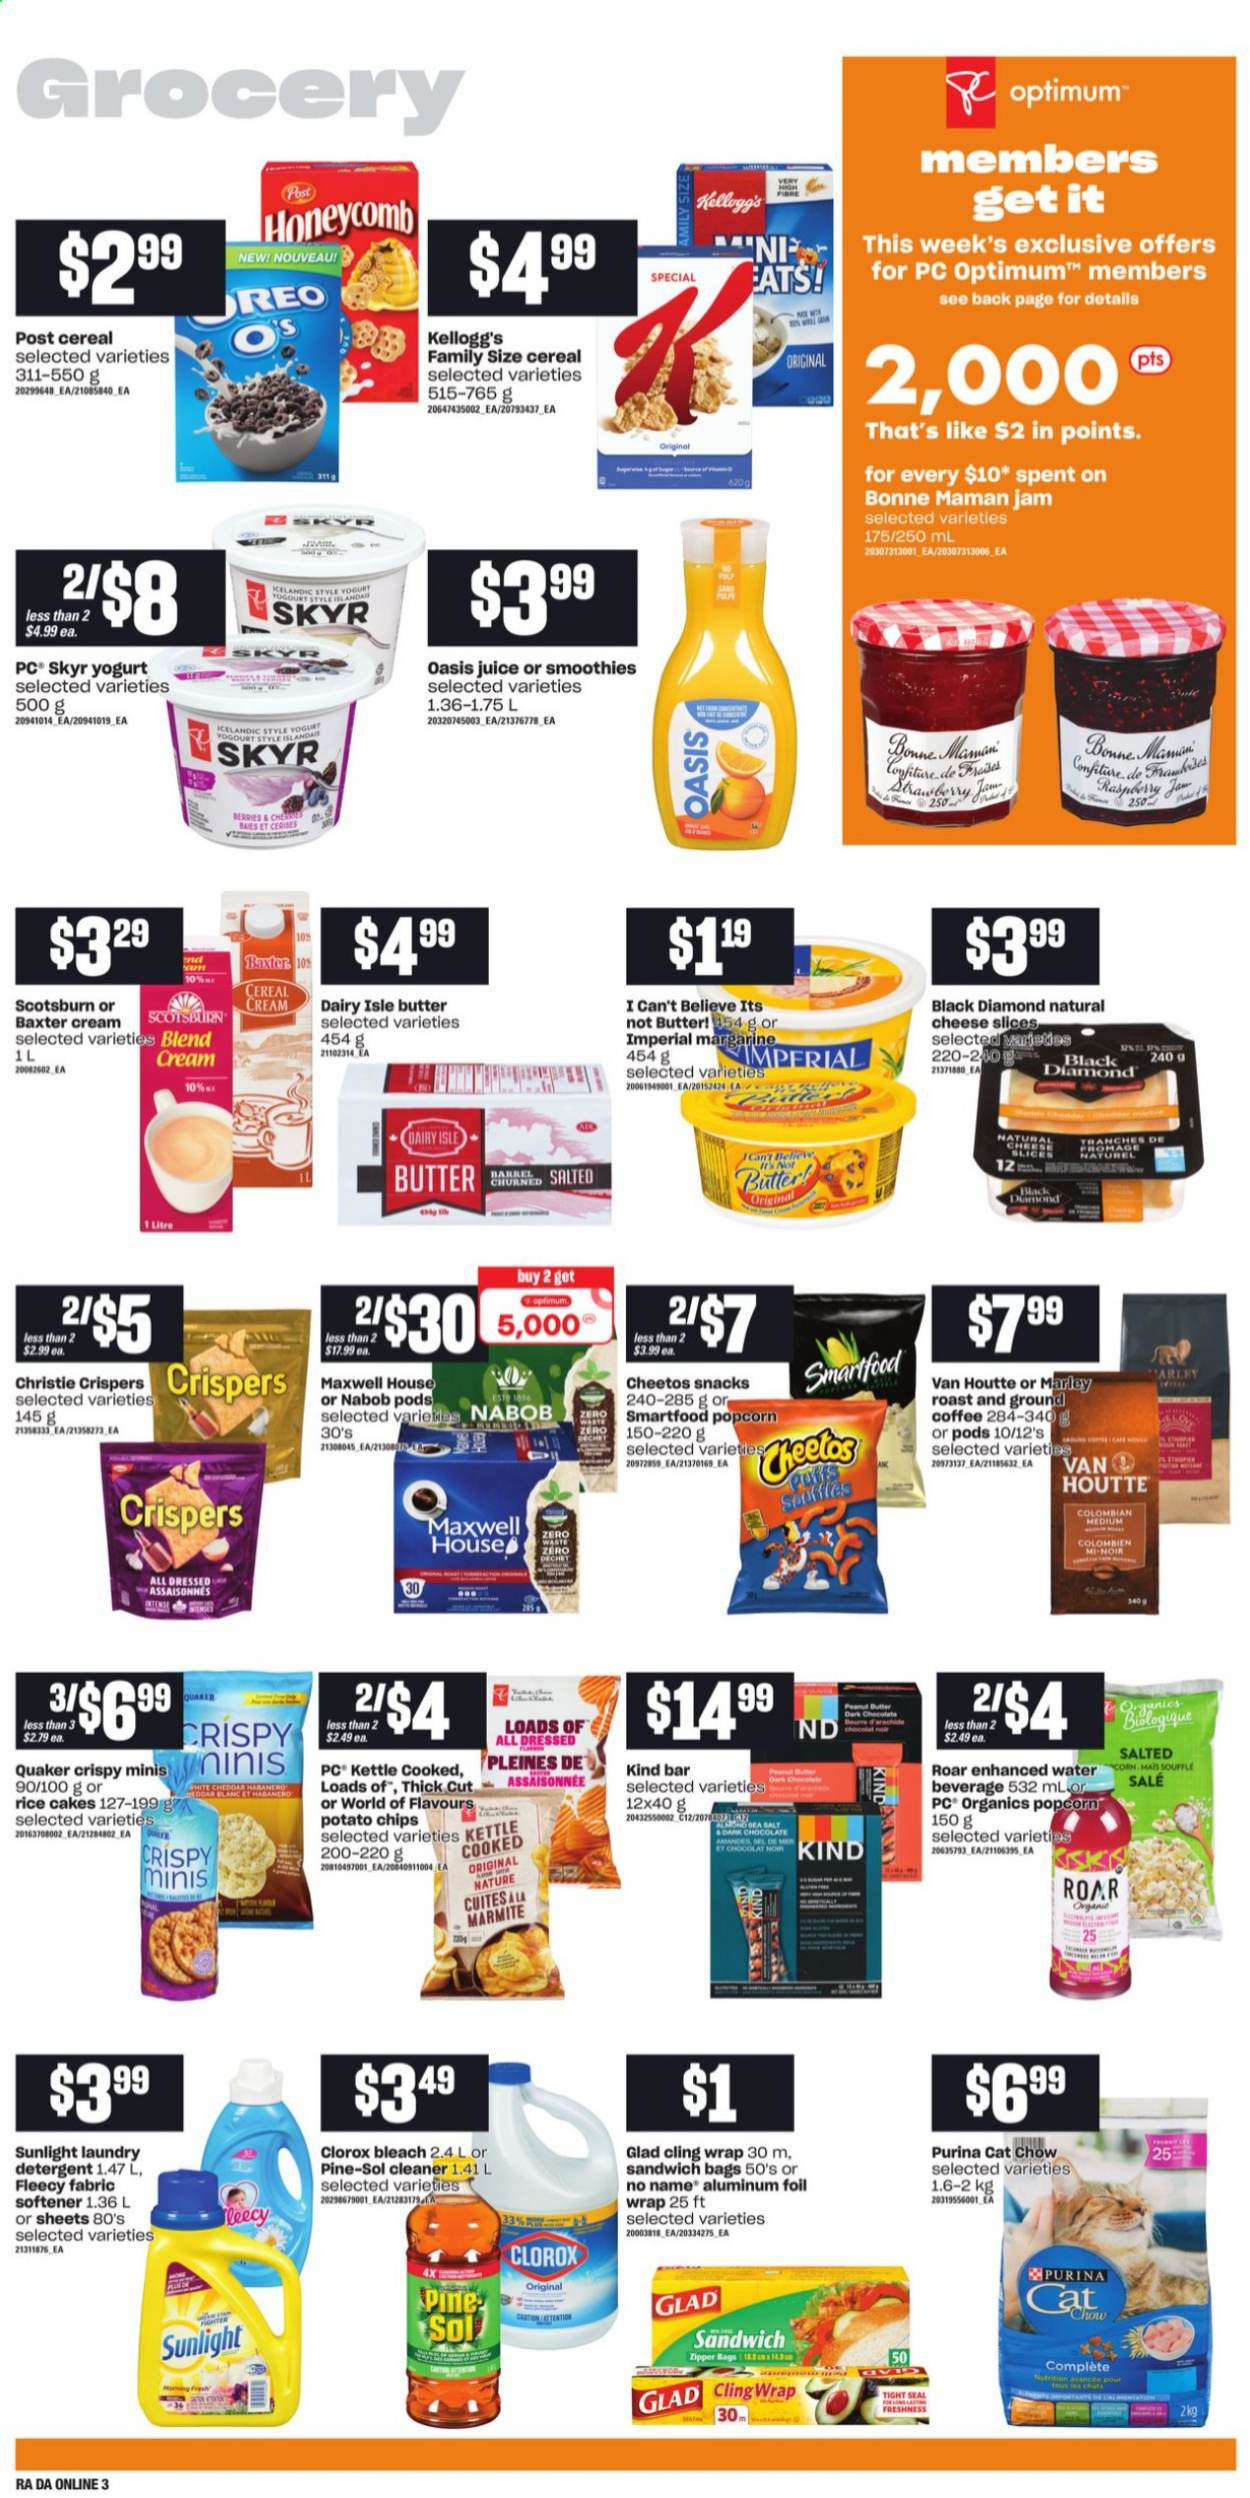 thumbnail - Atlantic Superstore Flyer - August 19, 2021 - August 25, 2021 - Sales products - corn, No Name, Quaker, sliced cheese, cheese, yoghurt, margarine, chocolate, snack, Kellogg's, dark chocolate, potato chips, Cheetos, Smartfood, popcorn, cereals, fruit jam, peanut butter, juice, Maxwell House, coffee, ground coffee, cleaner, bleach, Clorox, Pine-Sol, fabric softener, laundry detergent, Sunlight, bag, Purina, Optimum, chips. Page 7.